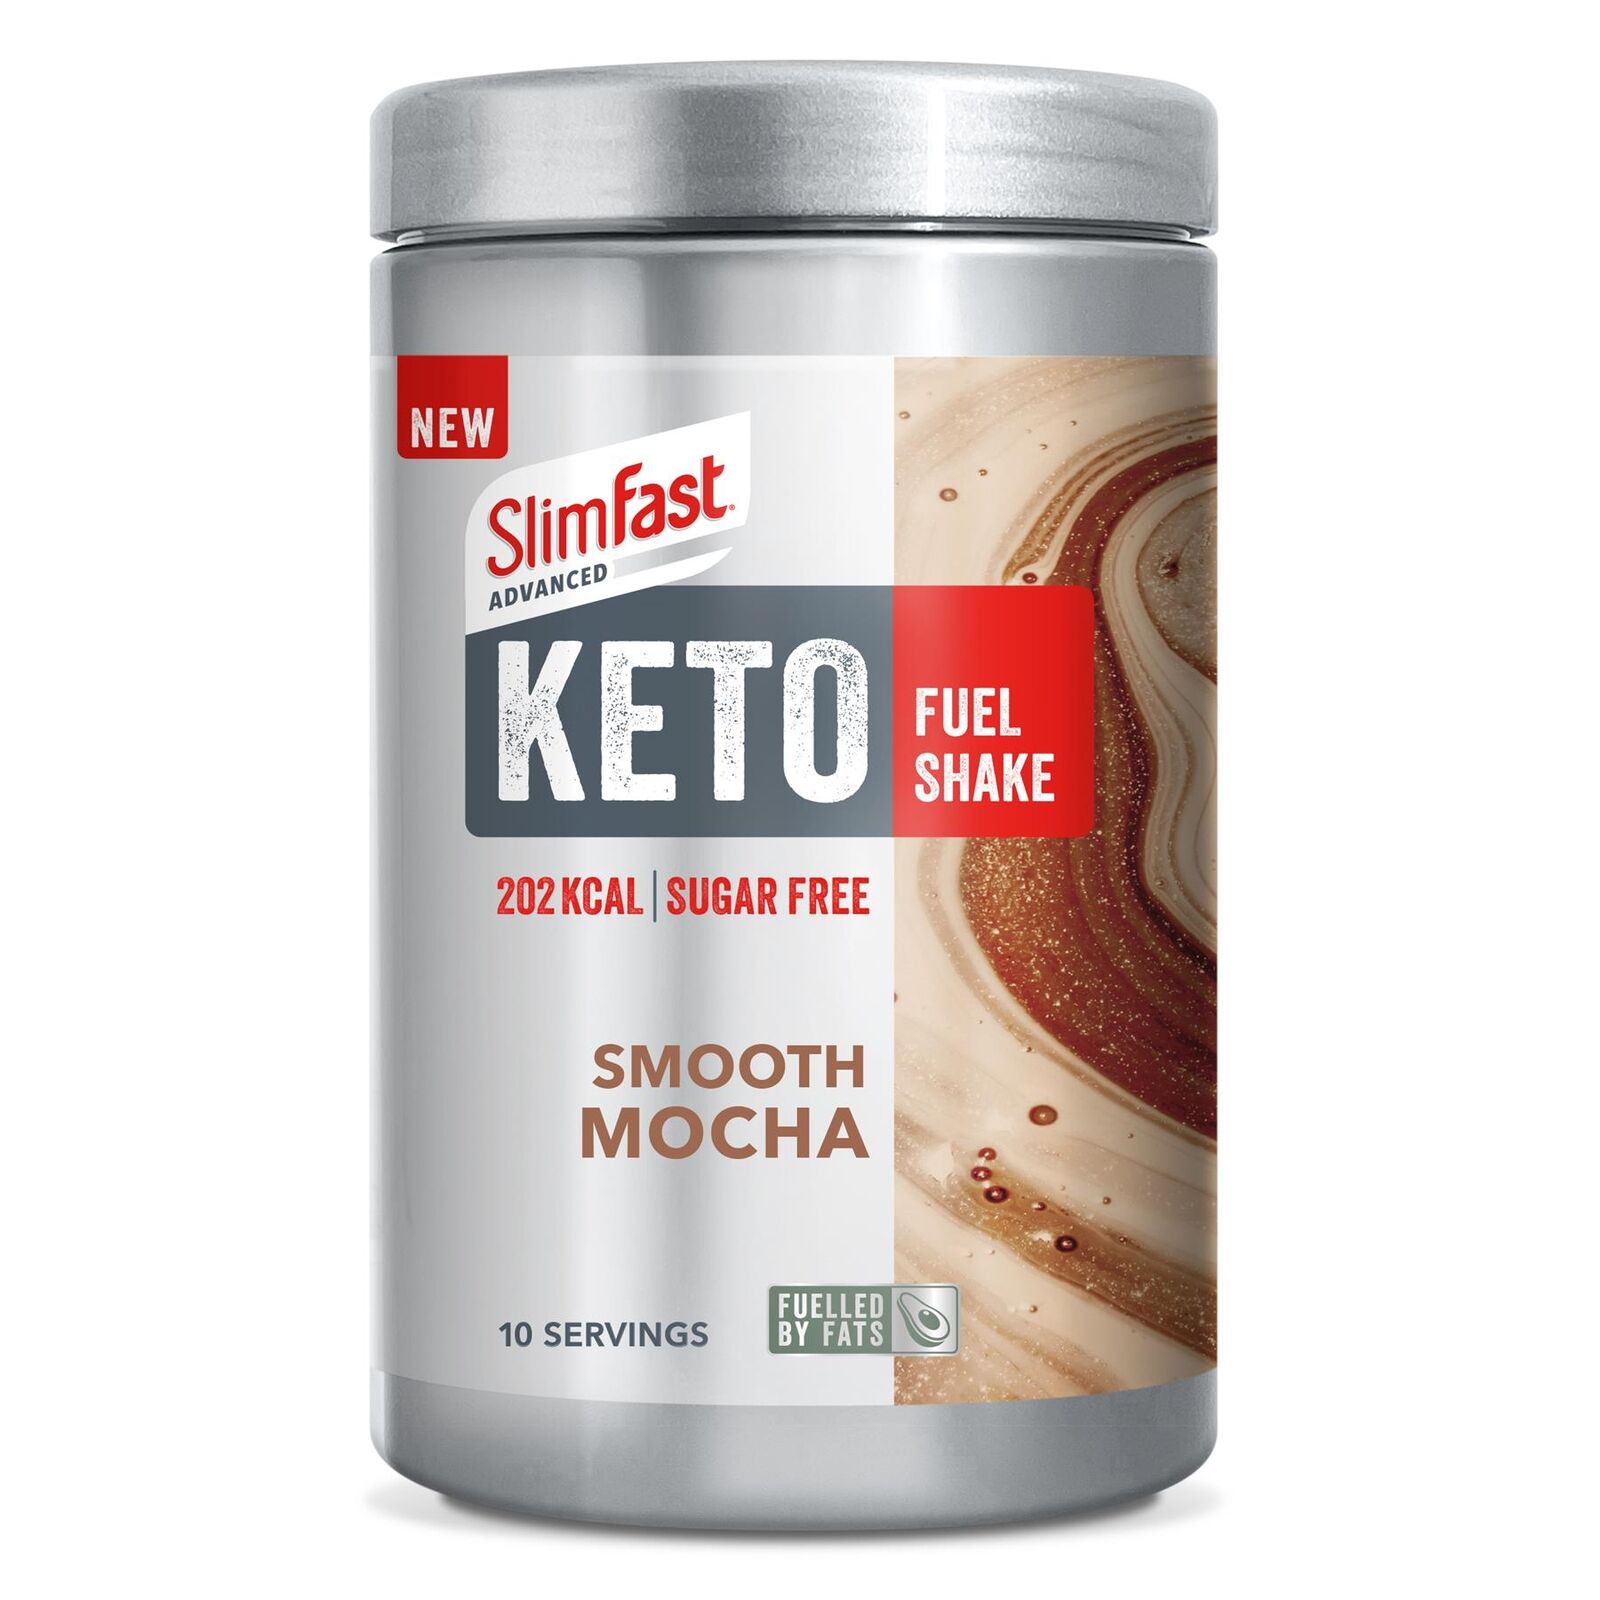 Keto Fuel Shake for Weight Loss